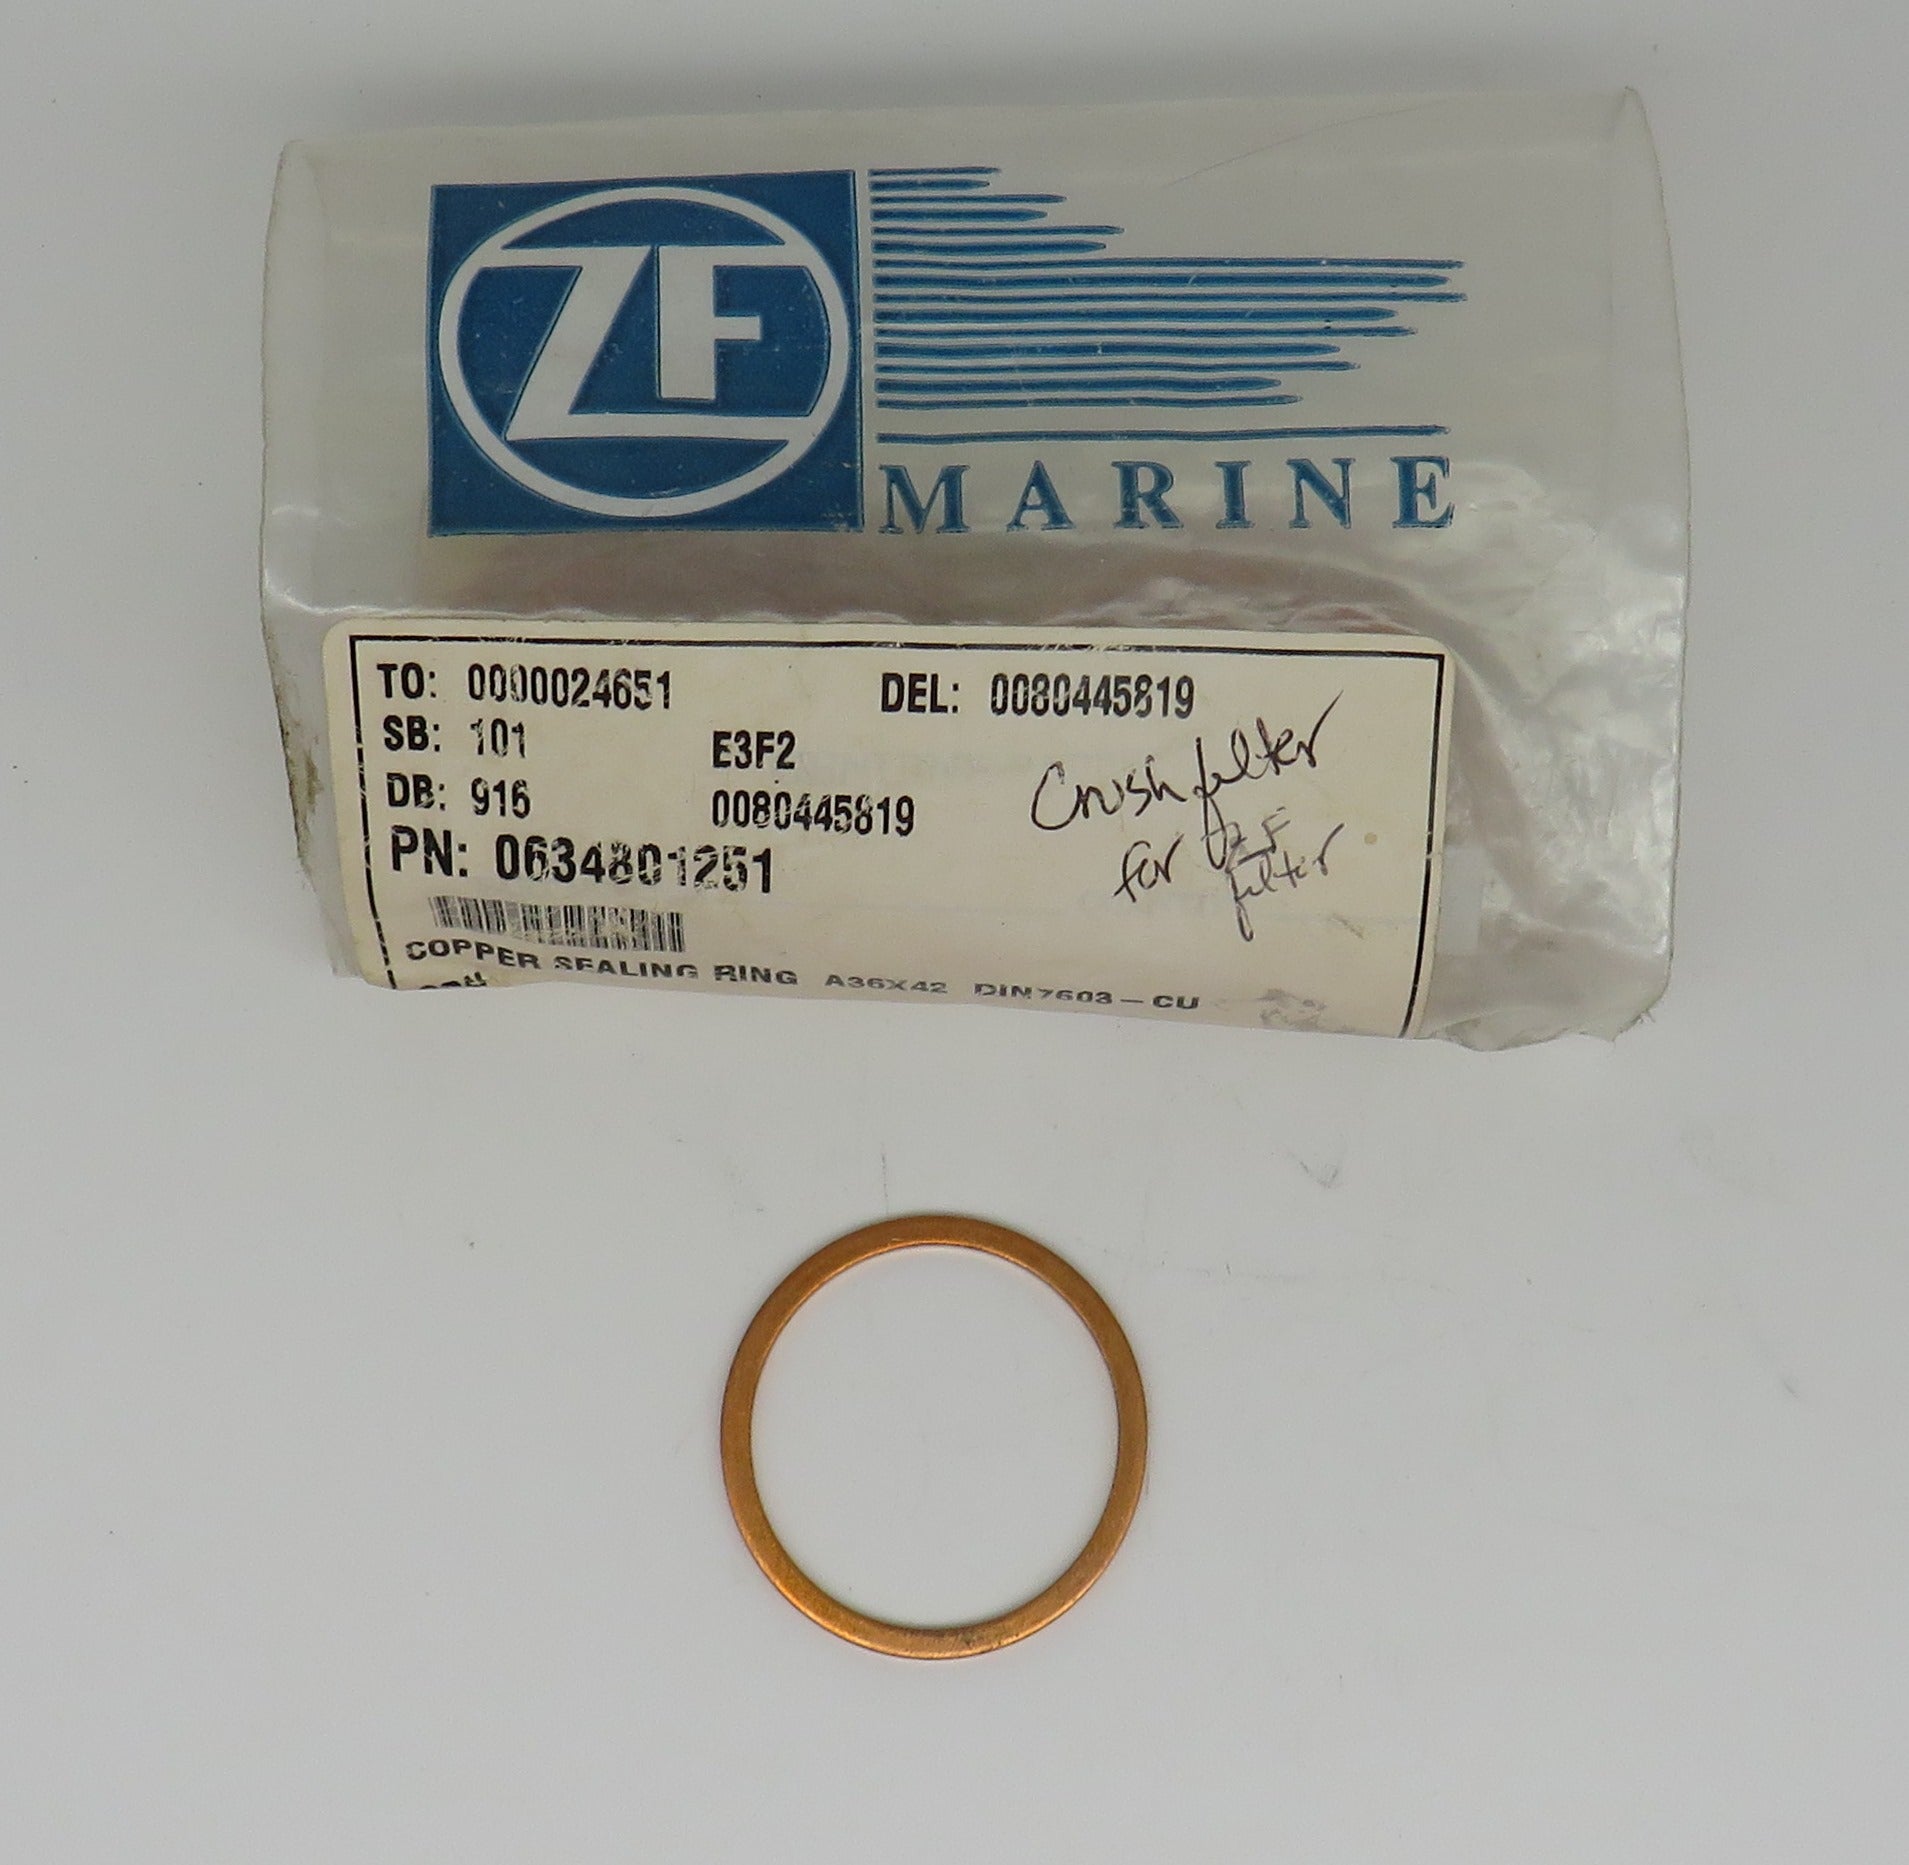 0634801251 Copper Sealing Ring Crush Filter for ZF Filter